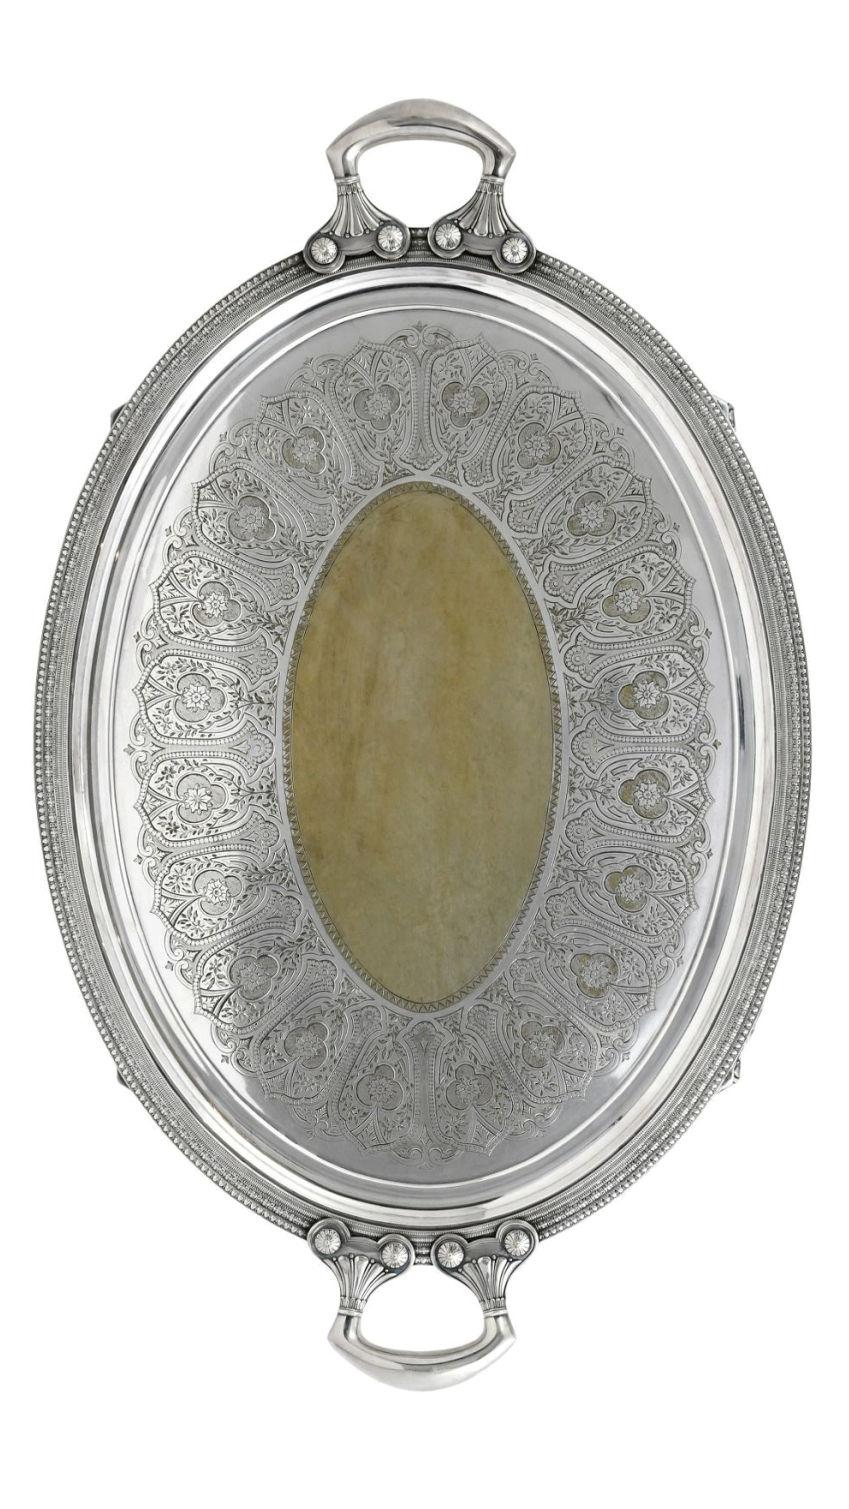 Large, antique19 century  silver plate salver with gilt wash by Tiffany and Company with finely embossed designs and handles.